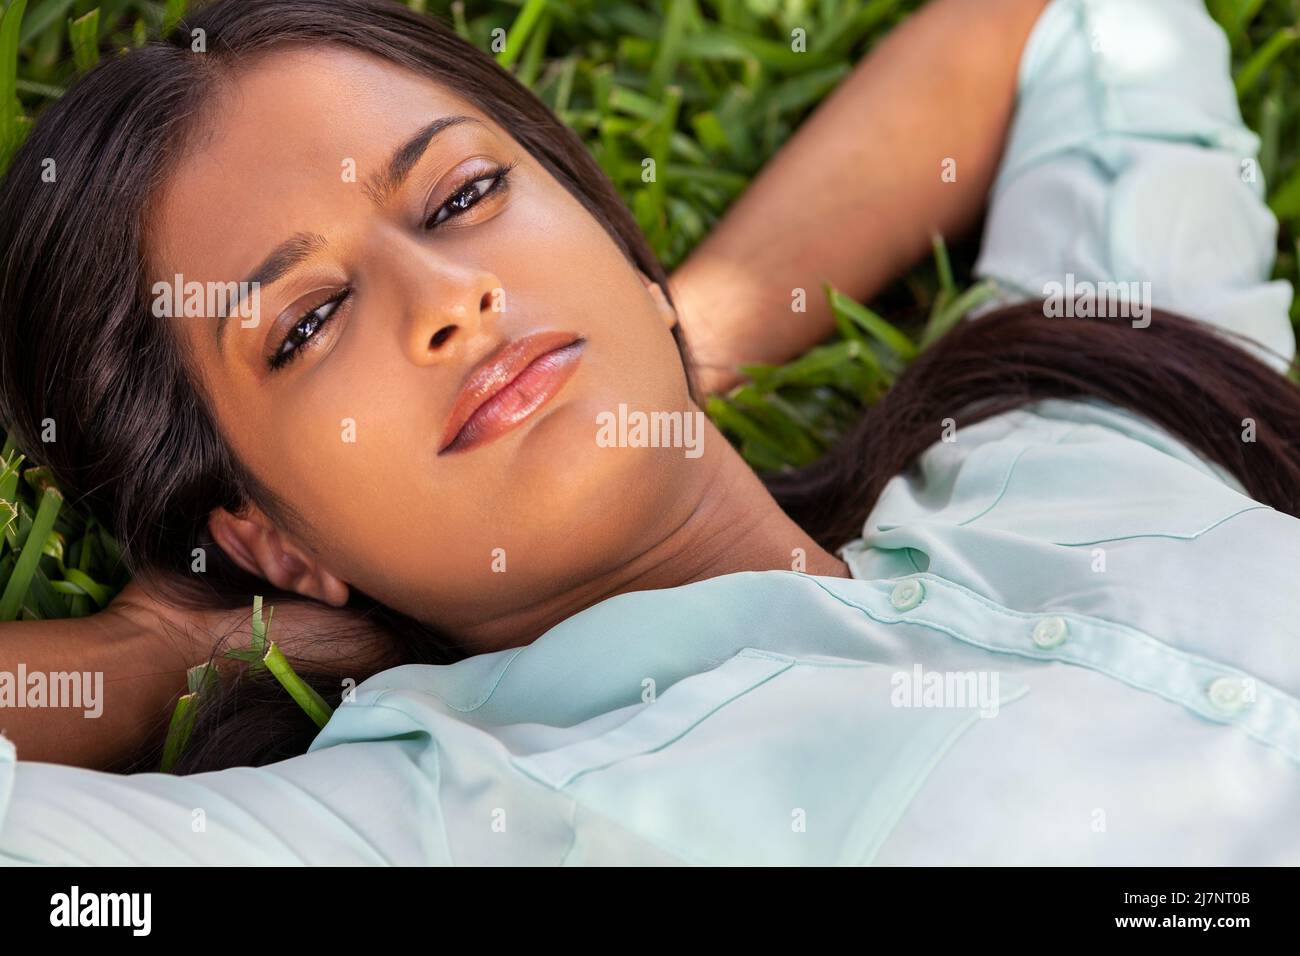 Outdoor portrait of a beautiful Indian Asian young woman or girl outside in summer sunshine laying down on grass Stock Photo